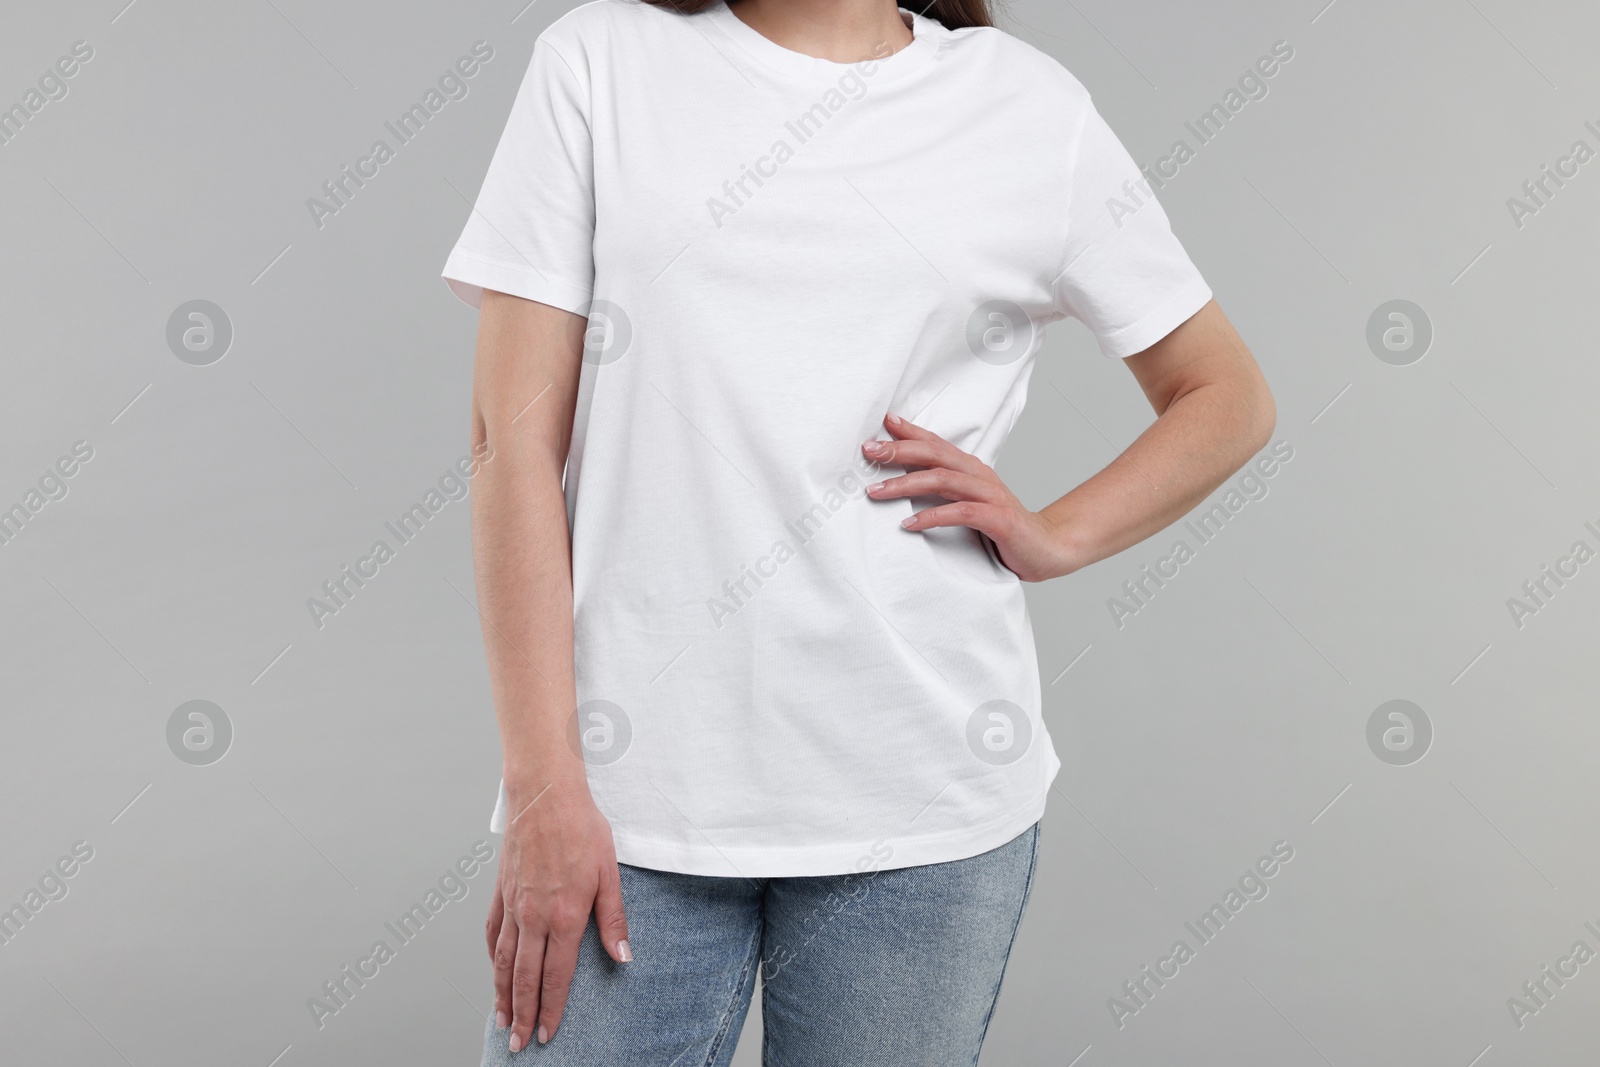 Photo of Woman in white t-shirt on grey background, closeup